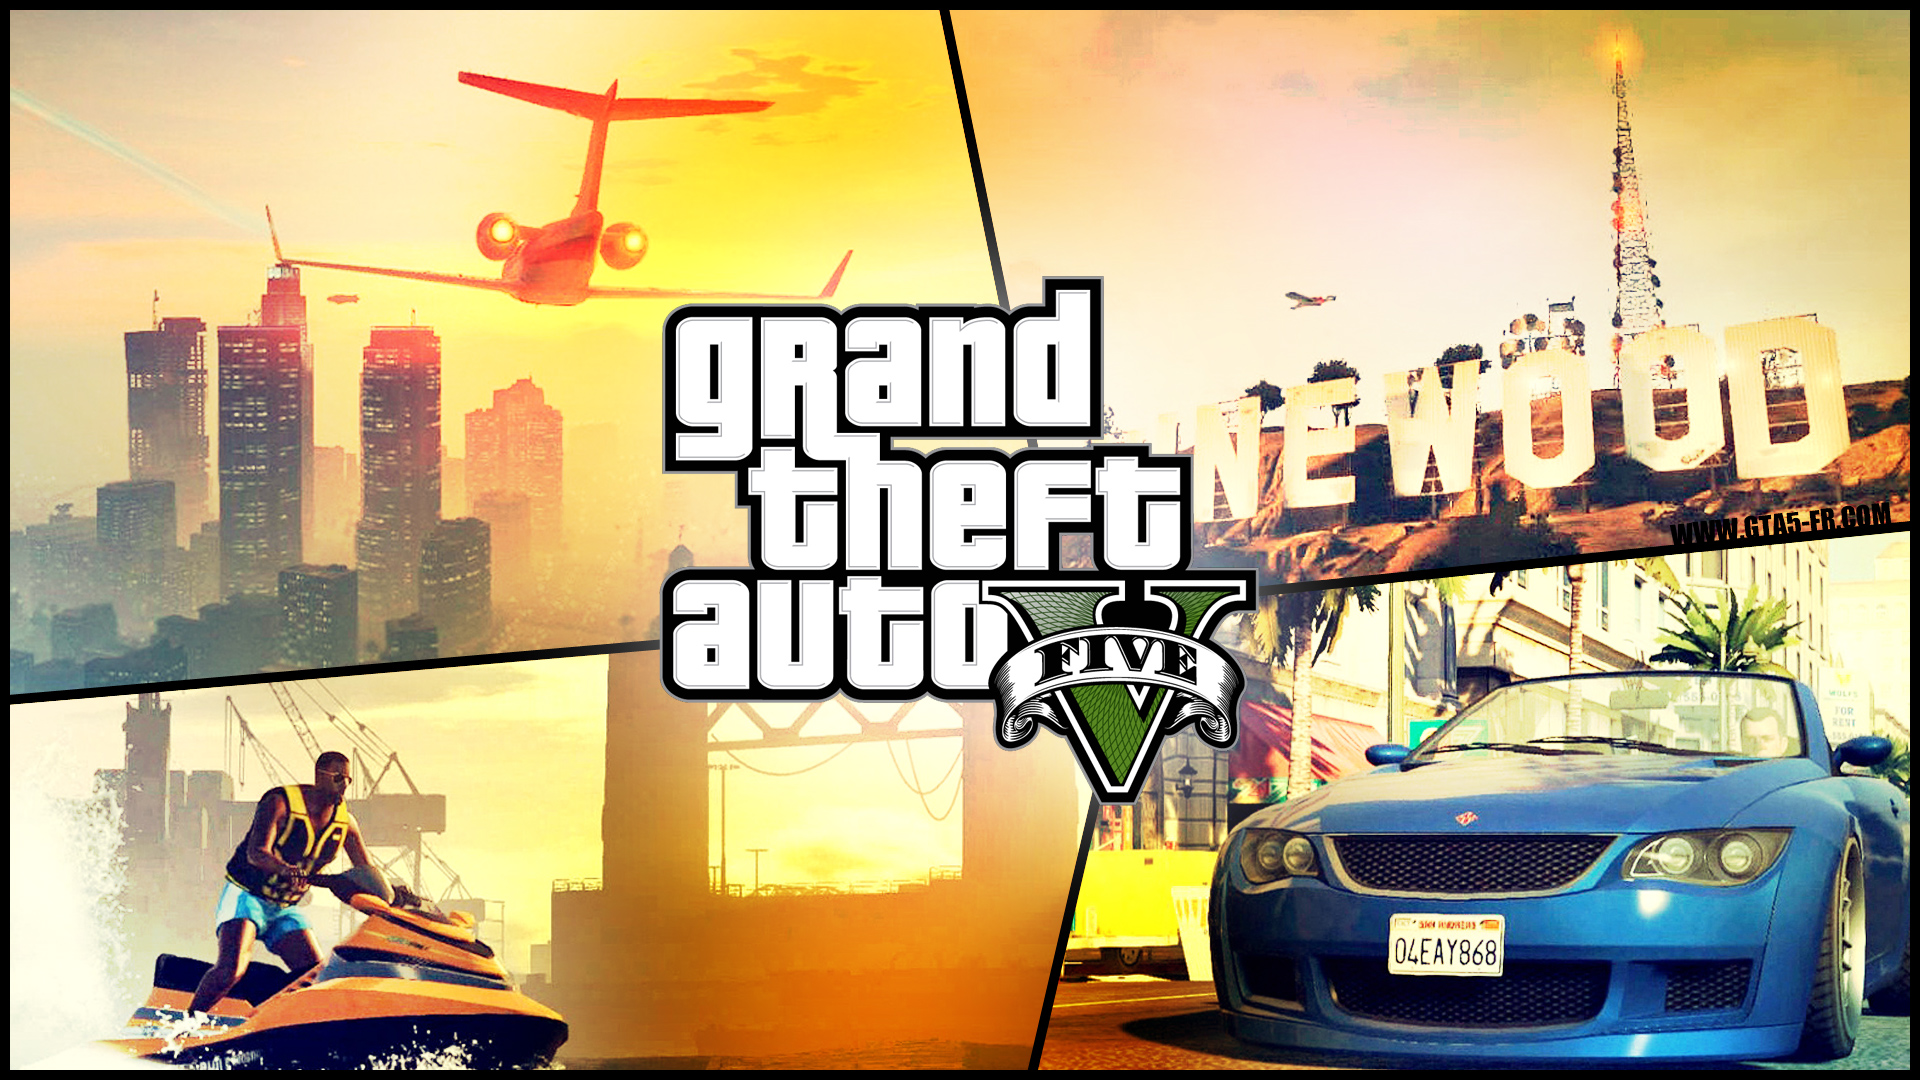 Grand Theft Auto 5 Free Desktop Wallpapers for HD Widescreen and